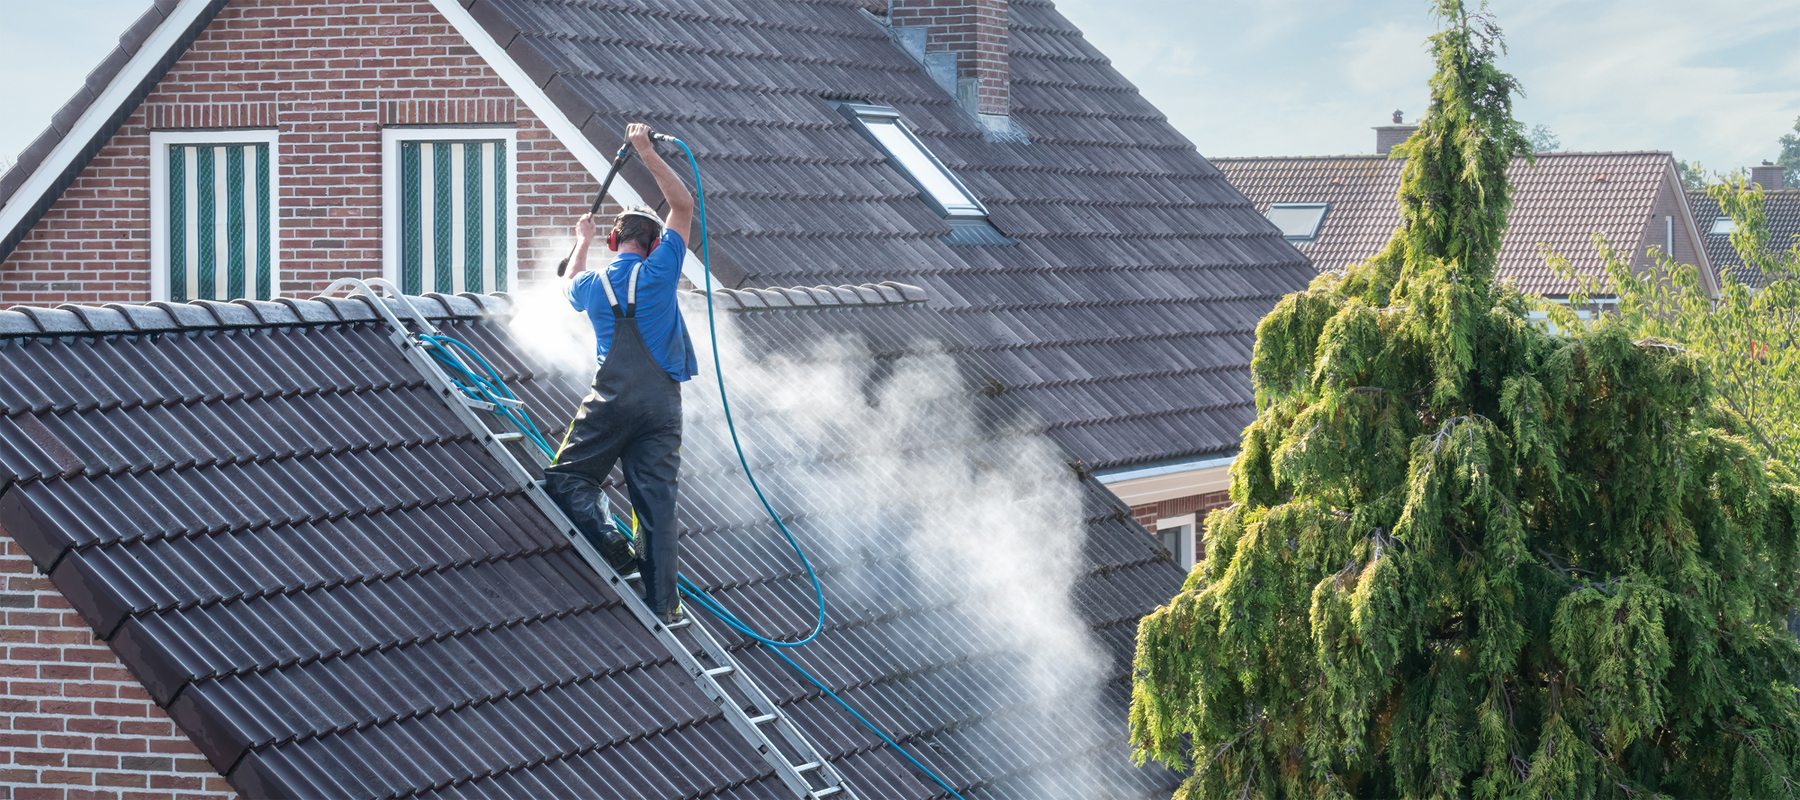 A Man on a Roof Doing a Pressure Wash Cleaning